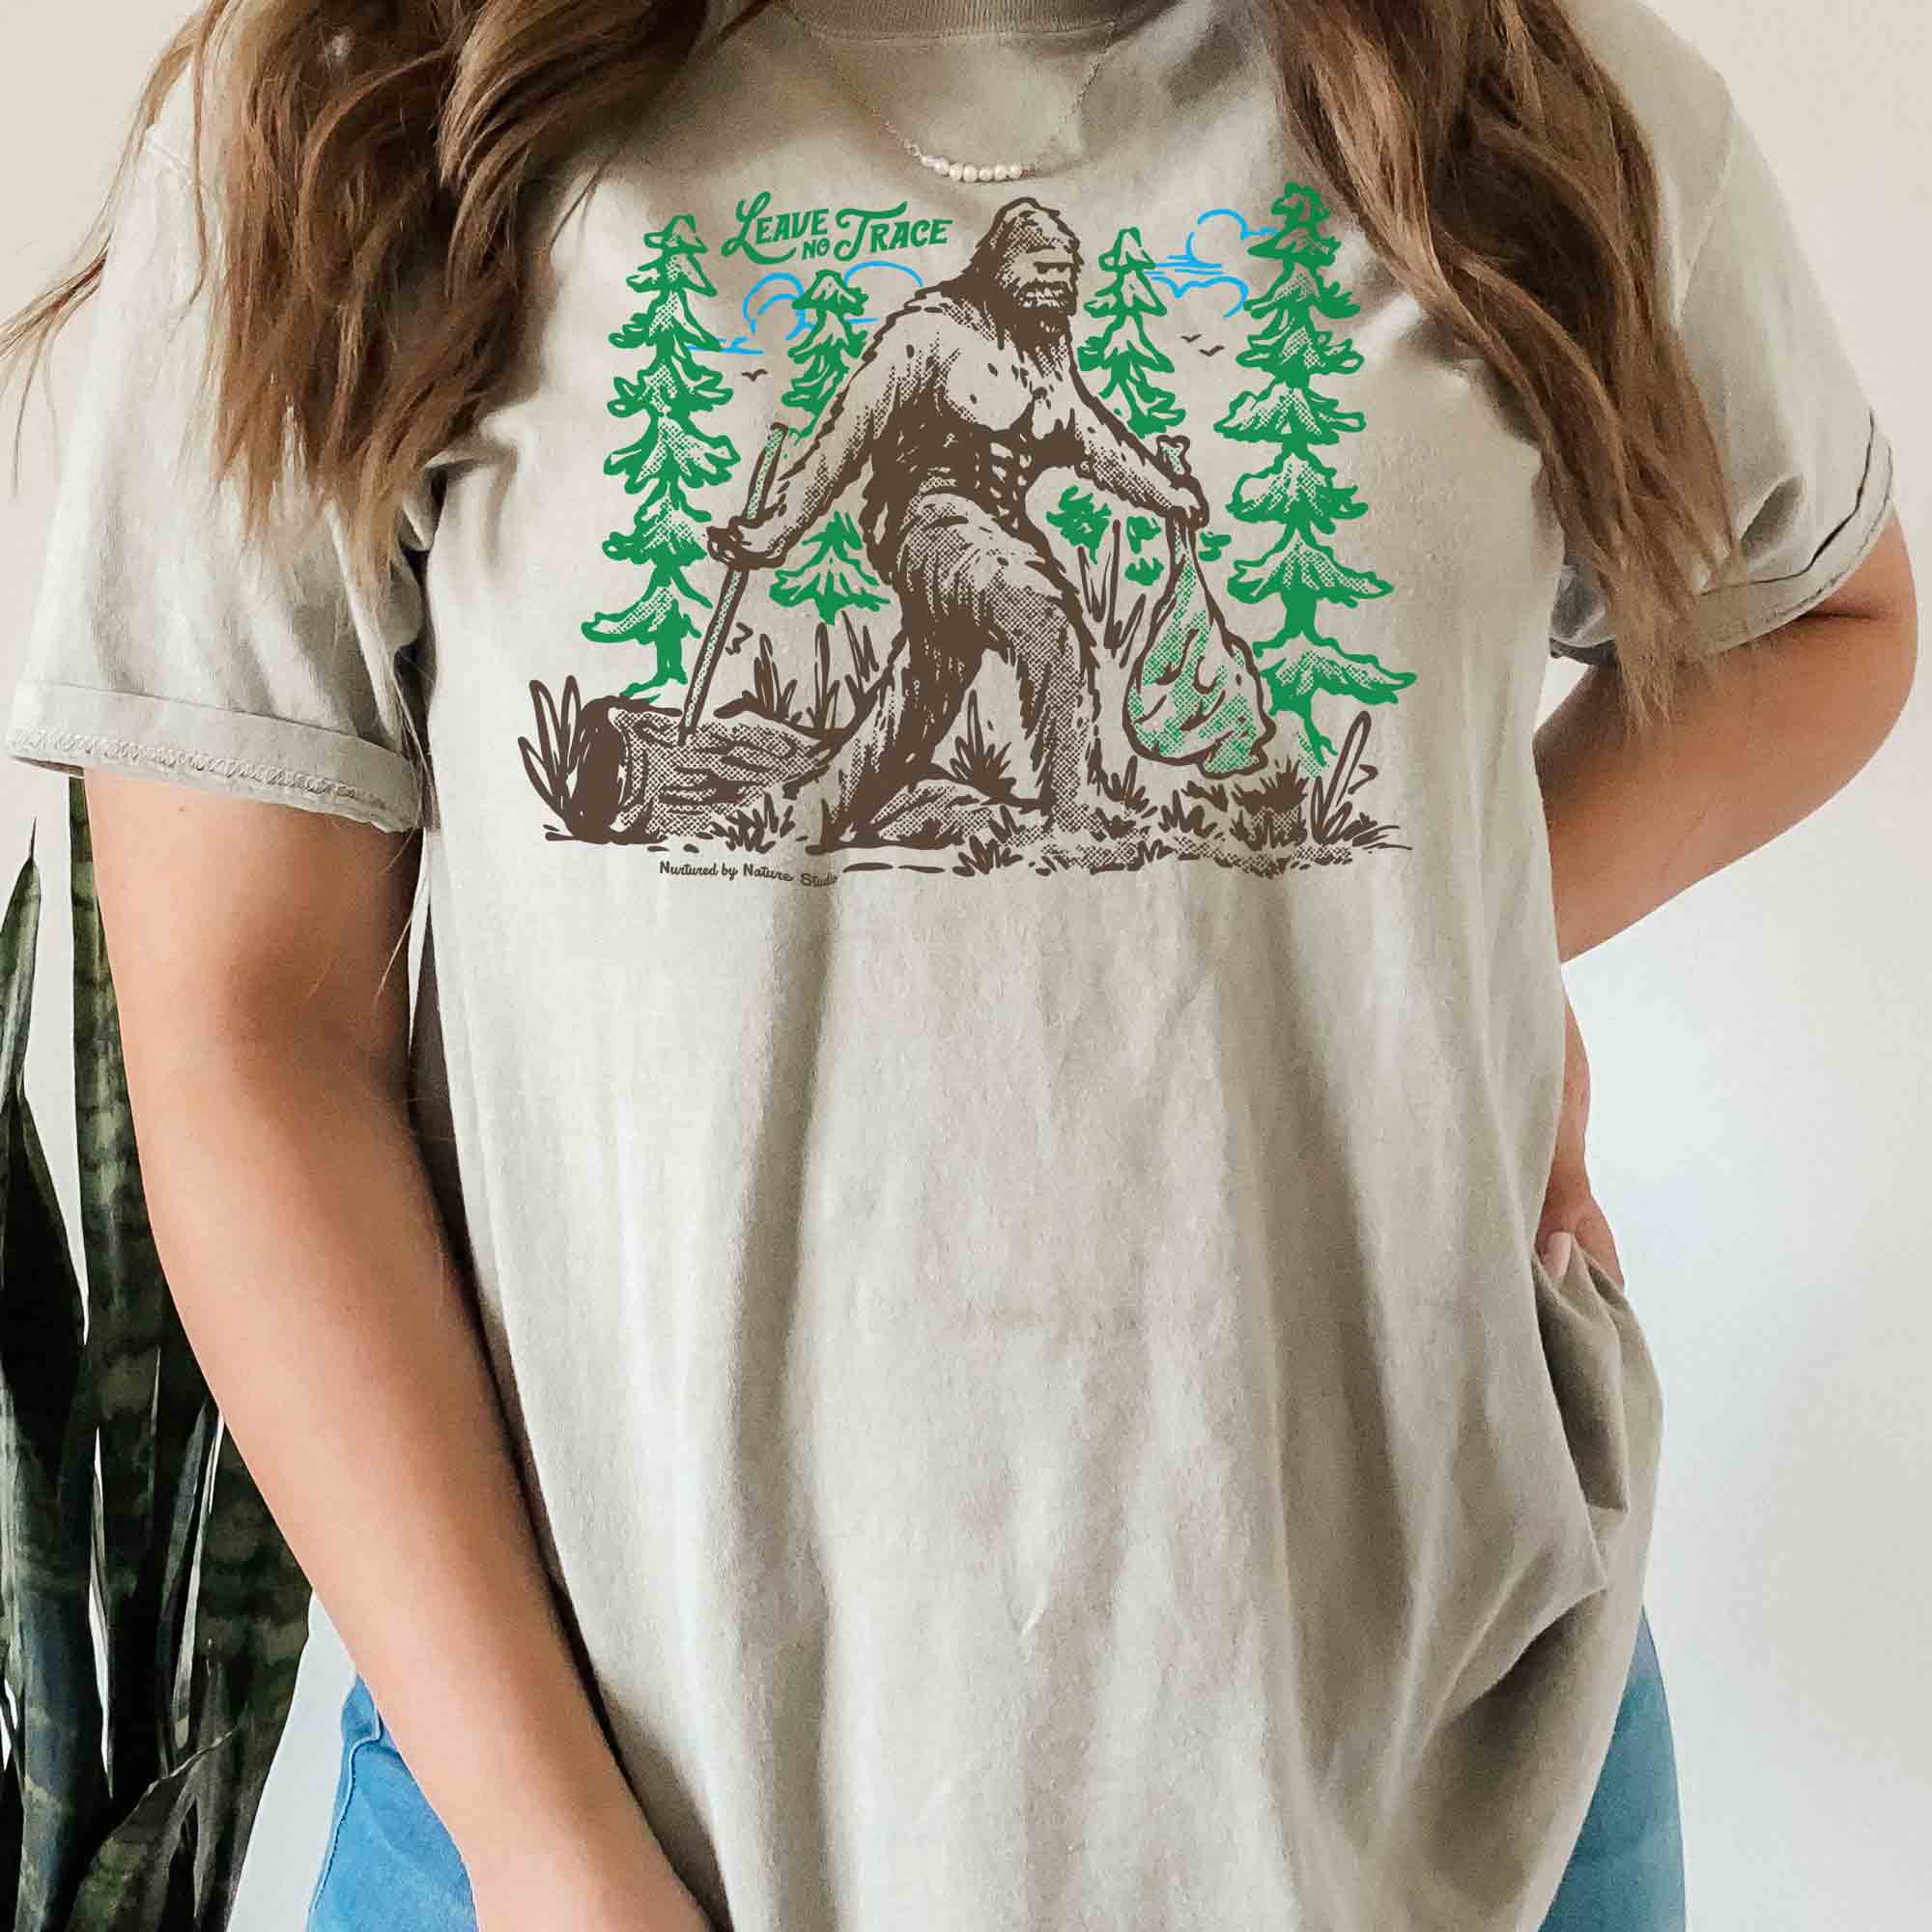 Bigfoot Sasquatch T-Shirt by Nurtured by Nature Studio for Camping, Hiking, Backpacking and Gifts